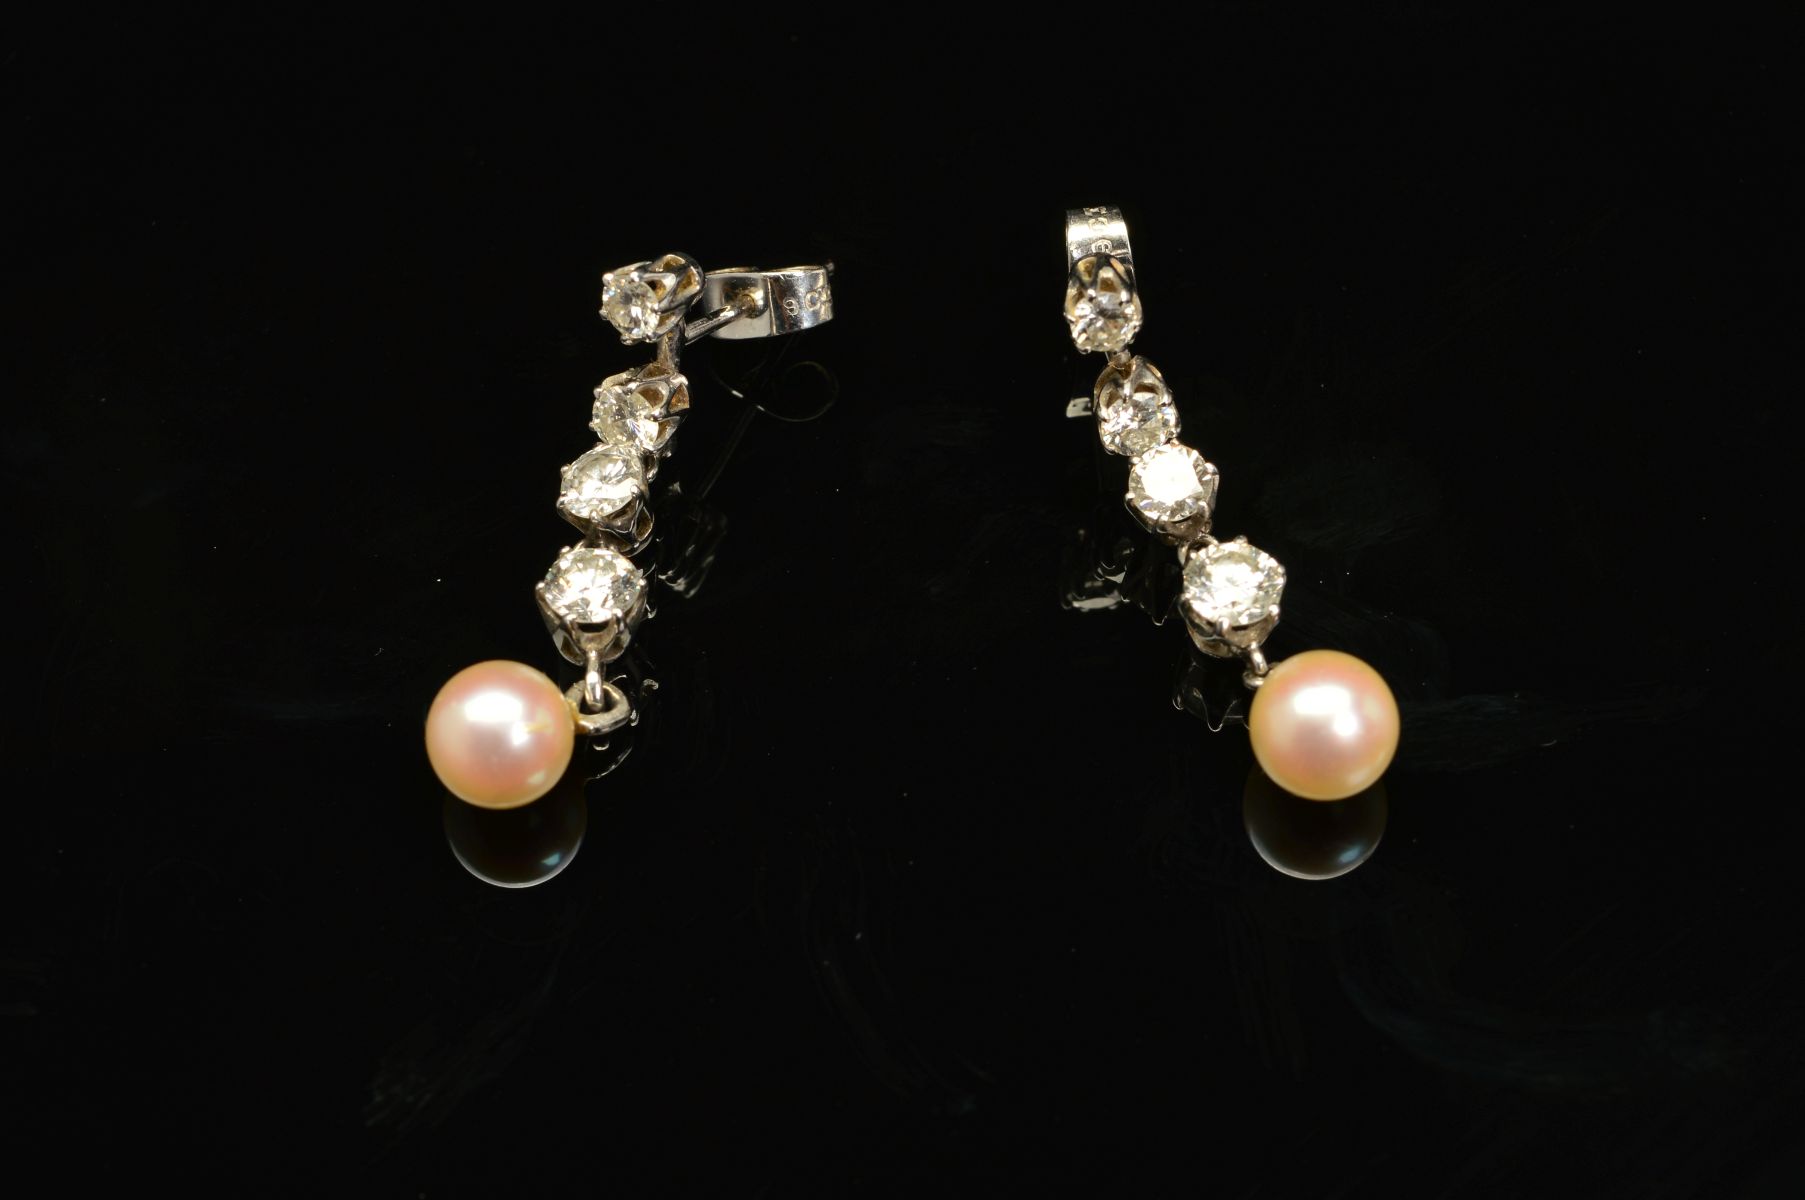 A PAIR OF MODERN DIAMOND AND CULTURED PEARL DROP EARRINGS, measuring approximately 28mm in length,